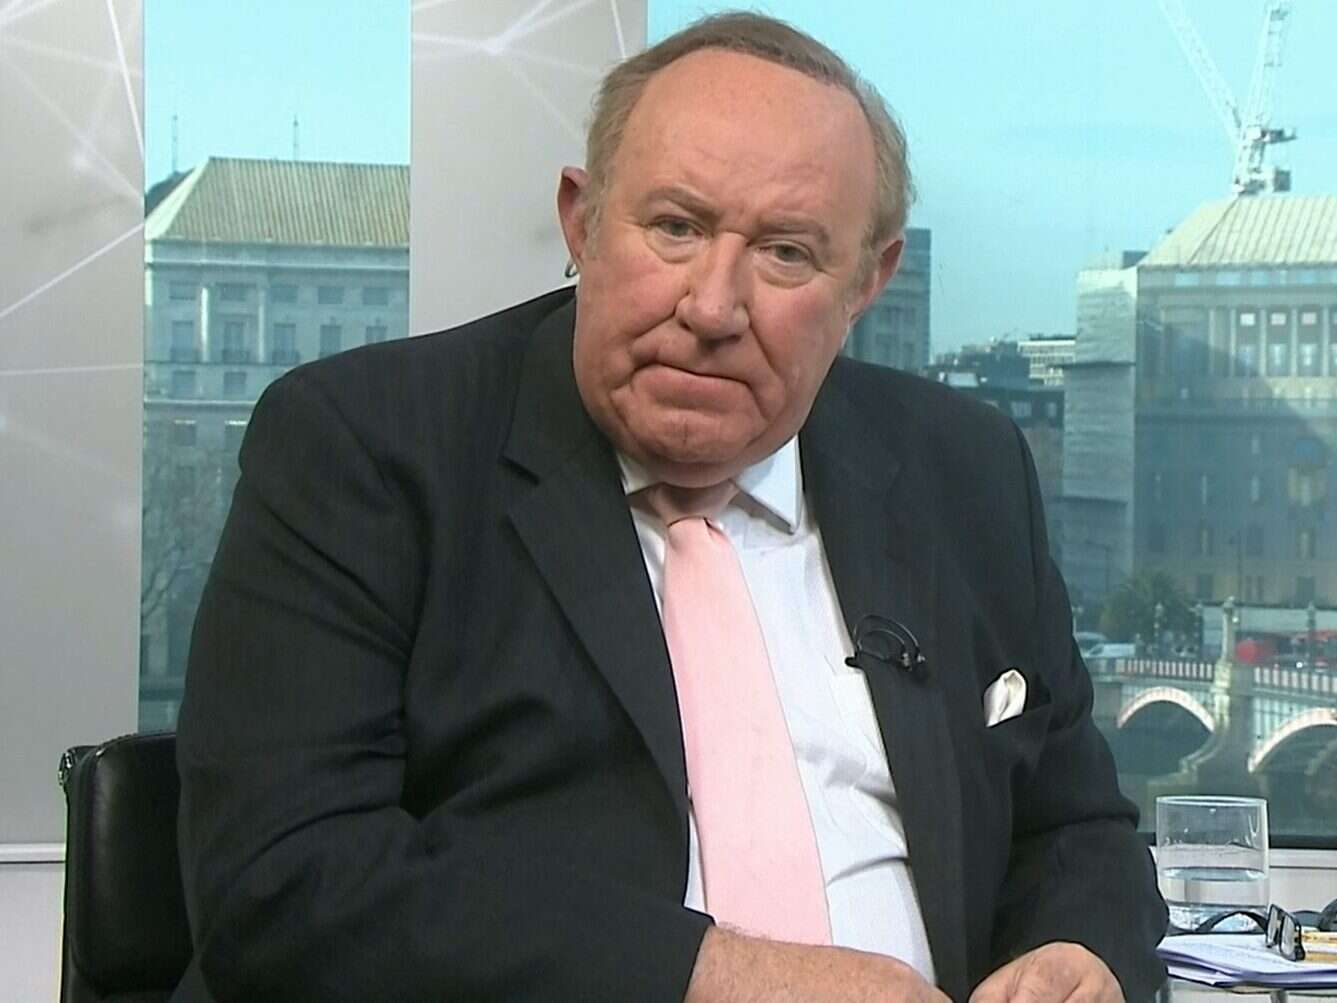 Millions watch Andrew Neil call out Boris Johnson over one-on-one interview snub